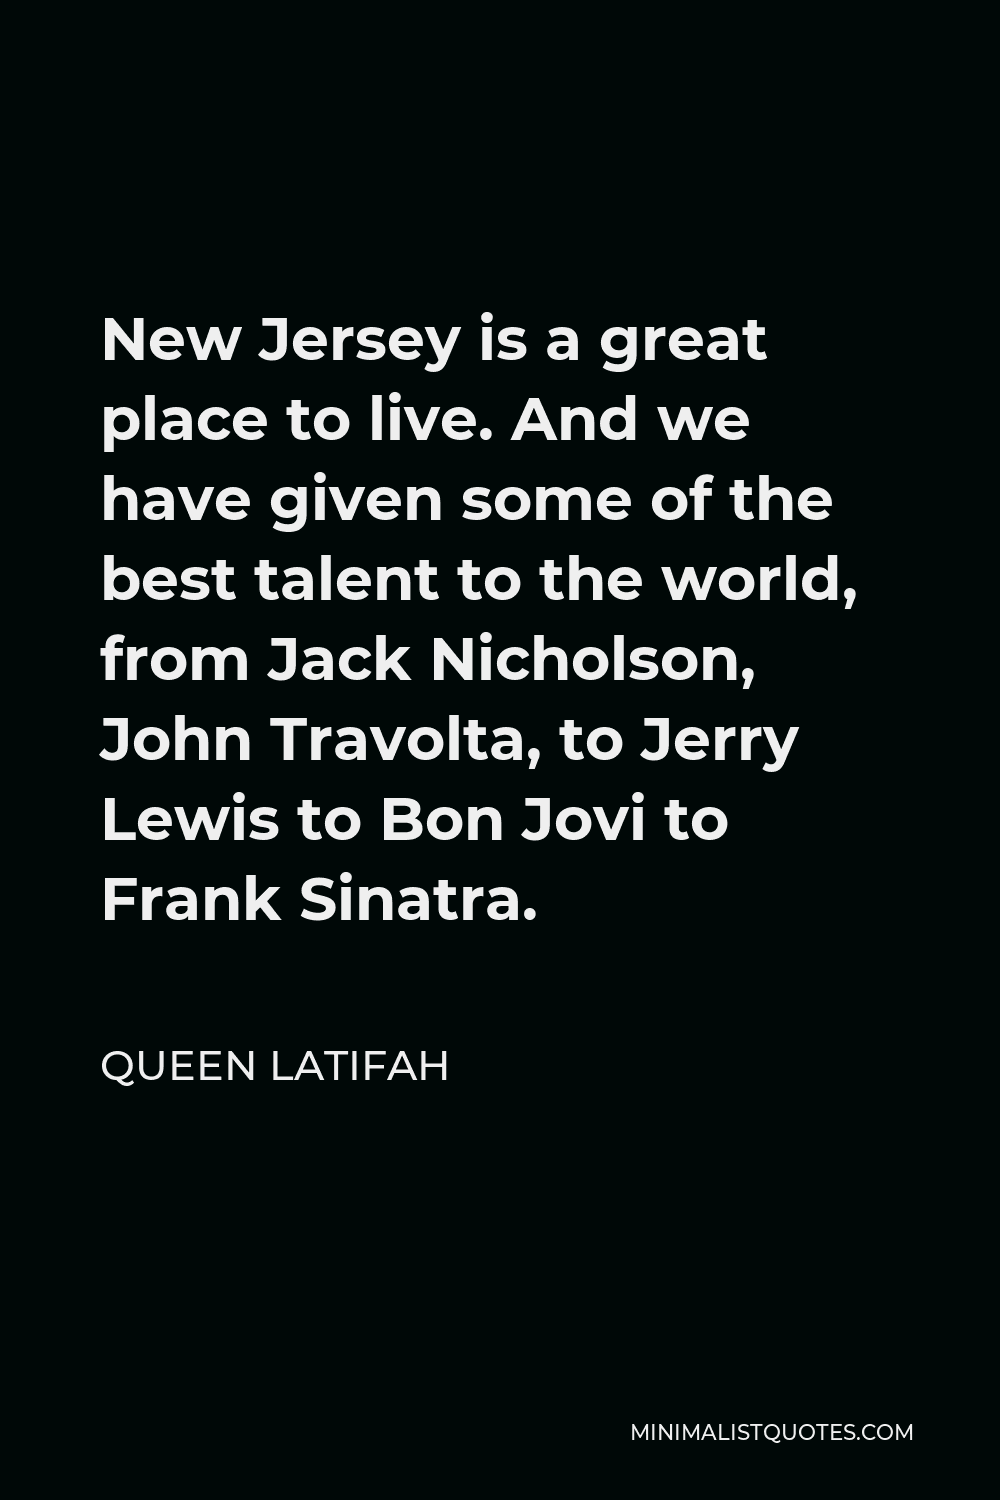 Queen Latifah Quote - New Jersey is a great place to live. And we have given some of the best talent to the world, from Jack Nicholson, John Travolta, to Jerry Lewis to Bon Jovi to Frank Sinatra.